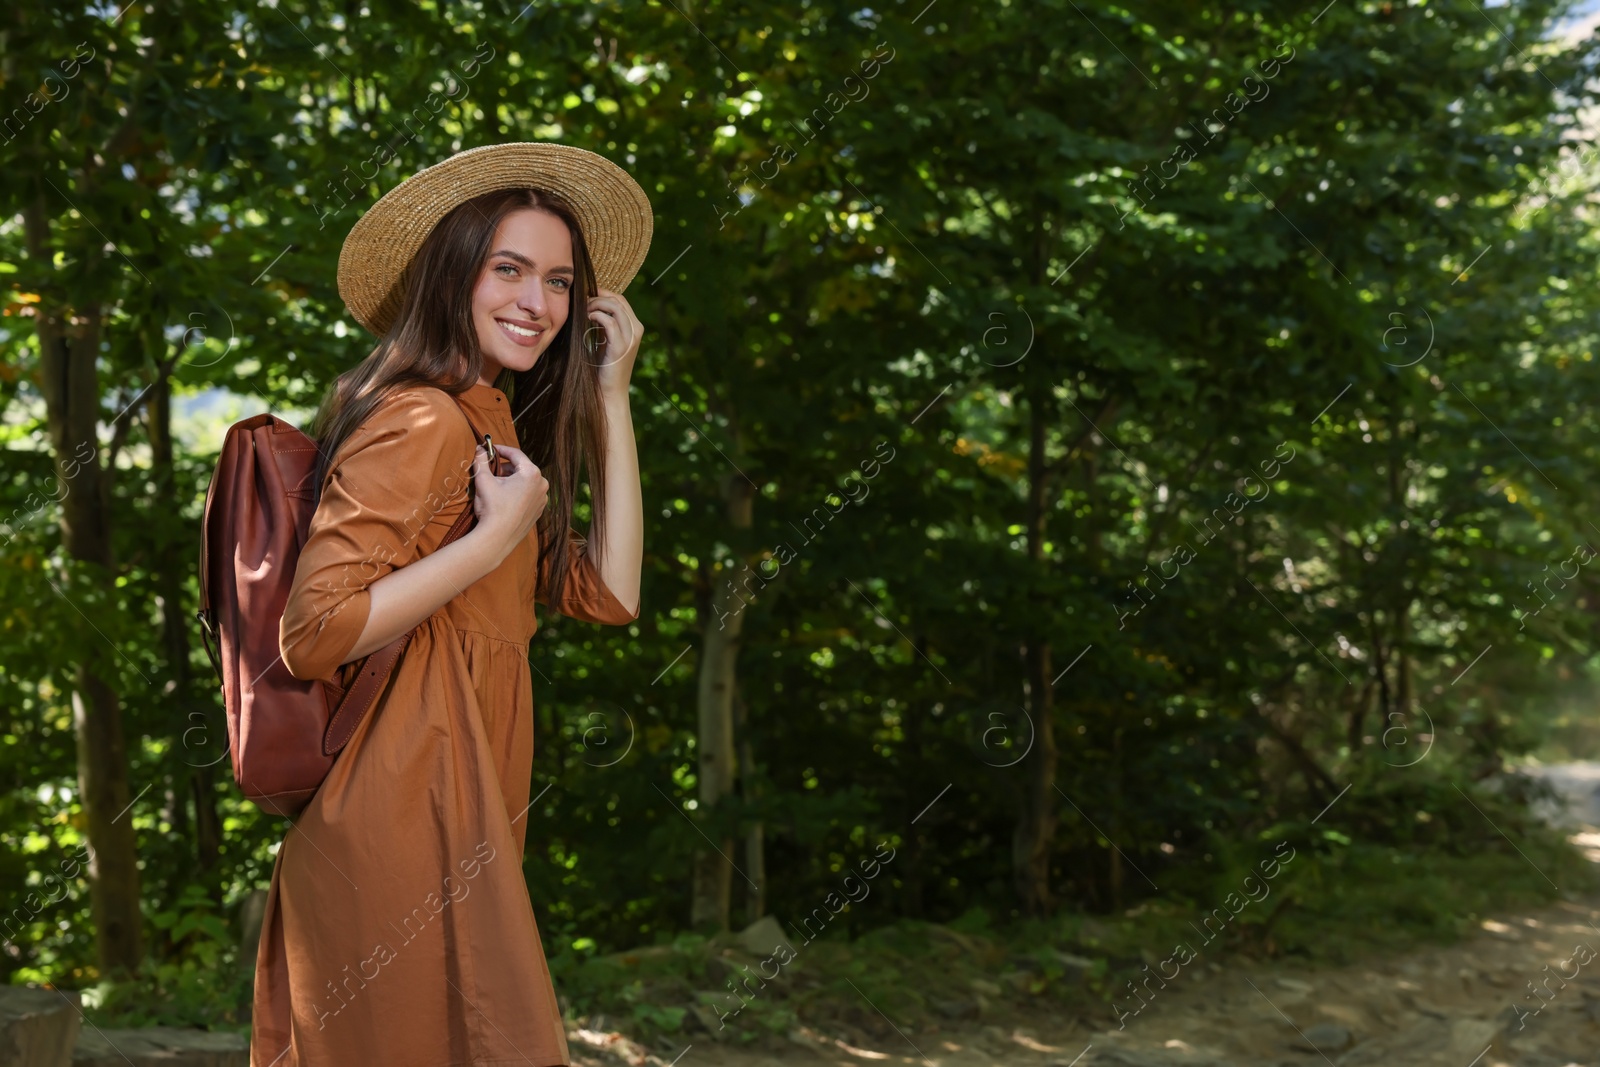 Photo of Happy woman with backpack and hat enjoying her walk in forest